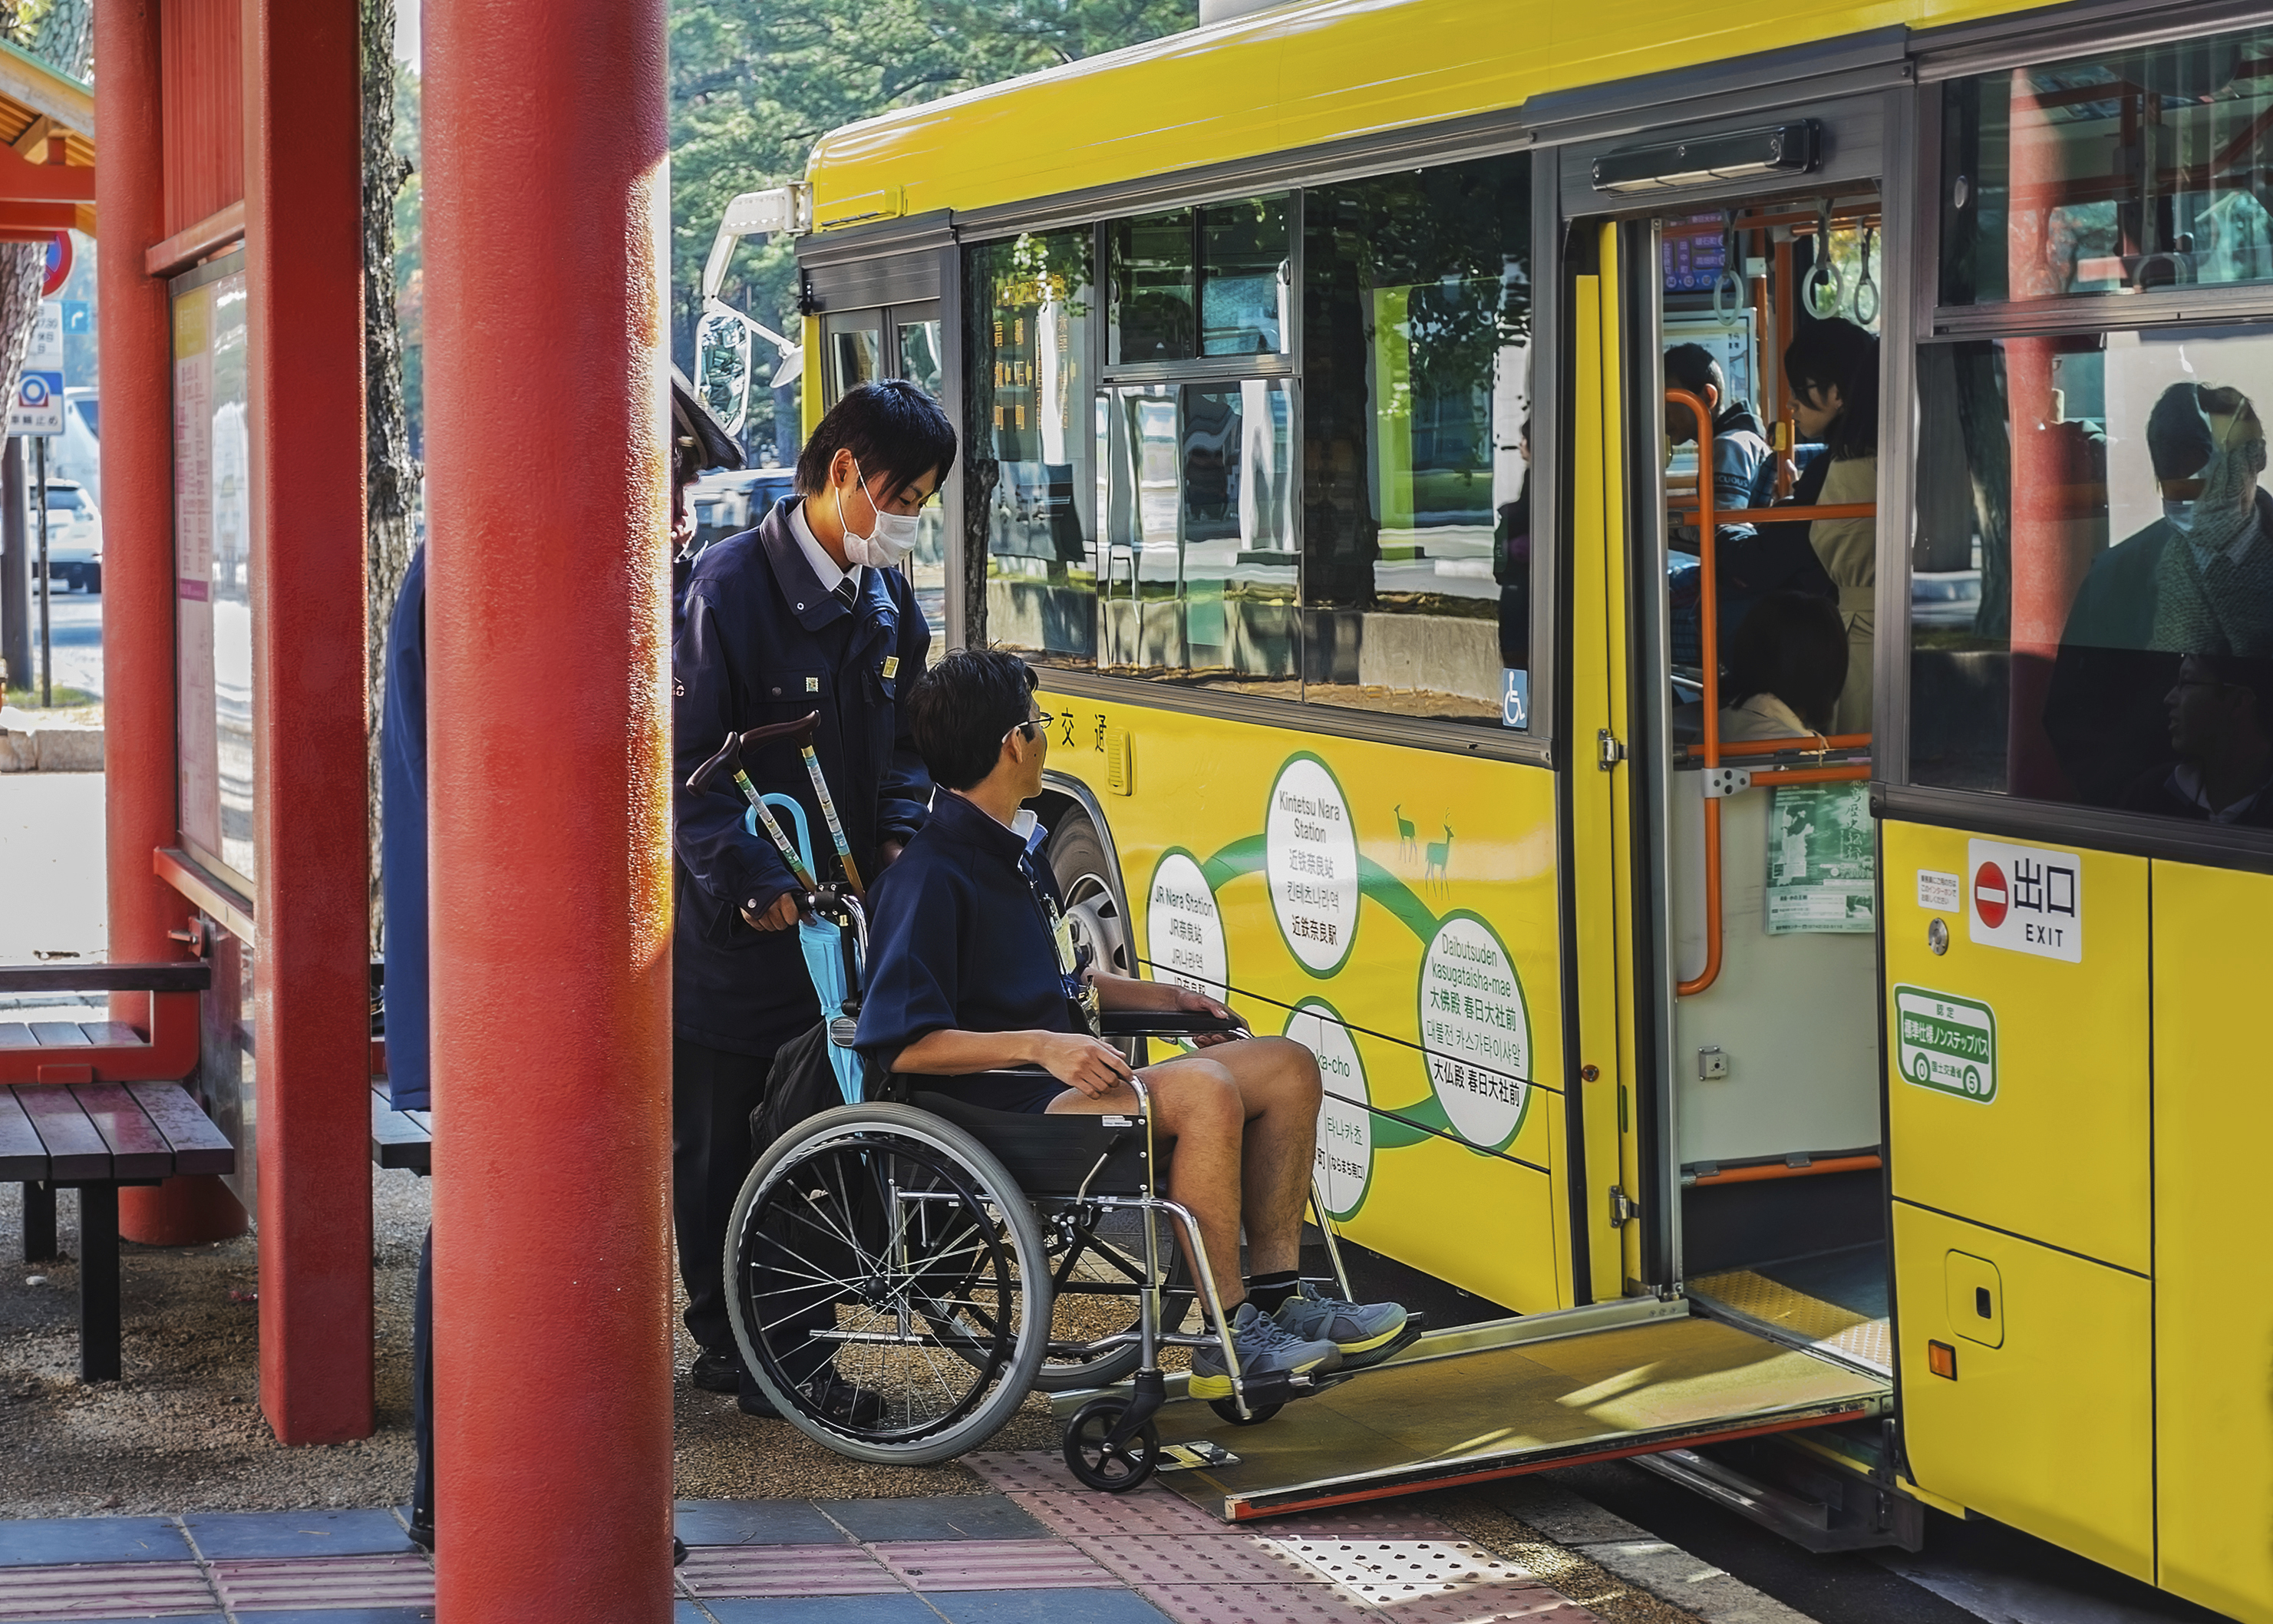 A man in a wheelchair rides a loop bus in Nara Prefecture. A new law requires government agencies and private businesses to remove 'social barriers' for people with impairments, including ensuring their access to public transportation. | ISTOCK